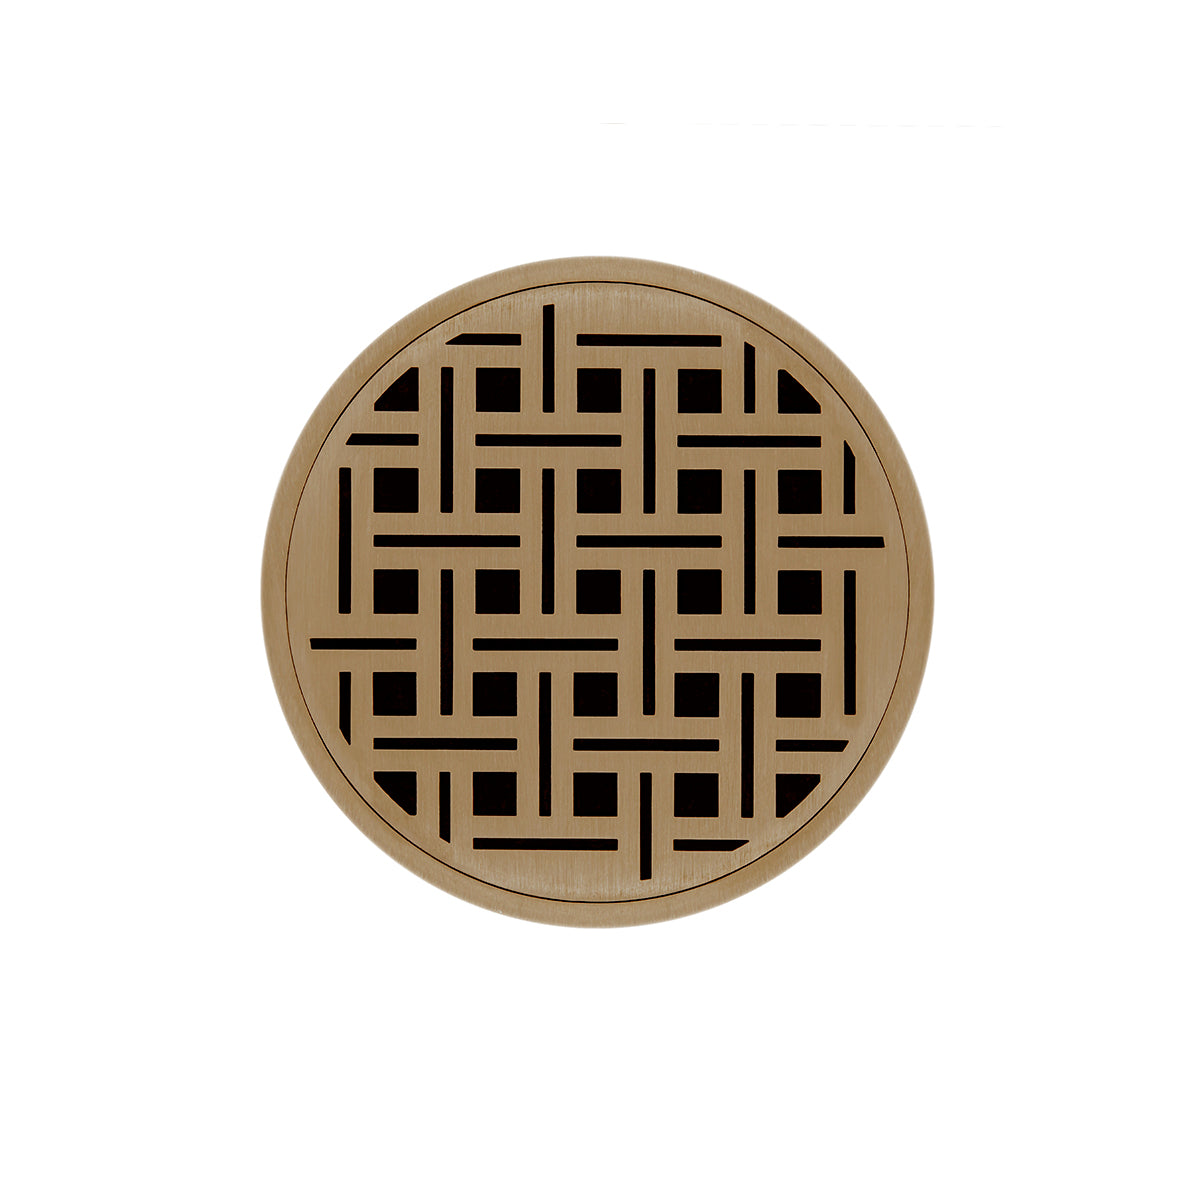 Infinity Drain 5" Round RVD 5 Premium Center Drain Kit with Weave Pattern Decorative Plate with Cast Iron Drain Body for Hot Mop, 2" Outlet